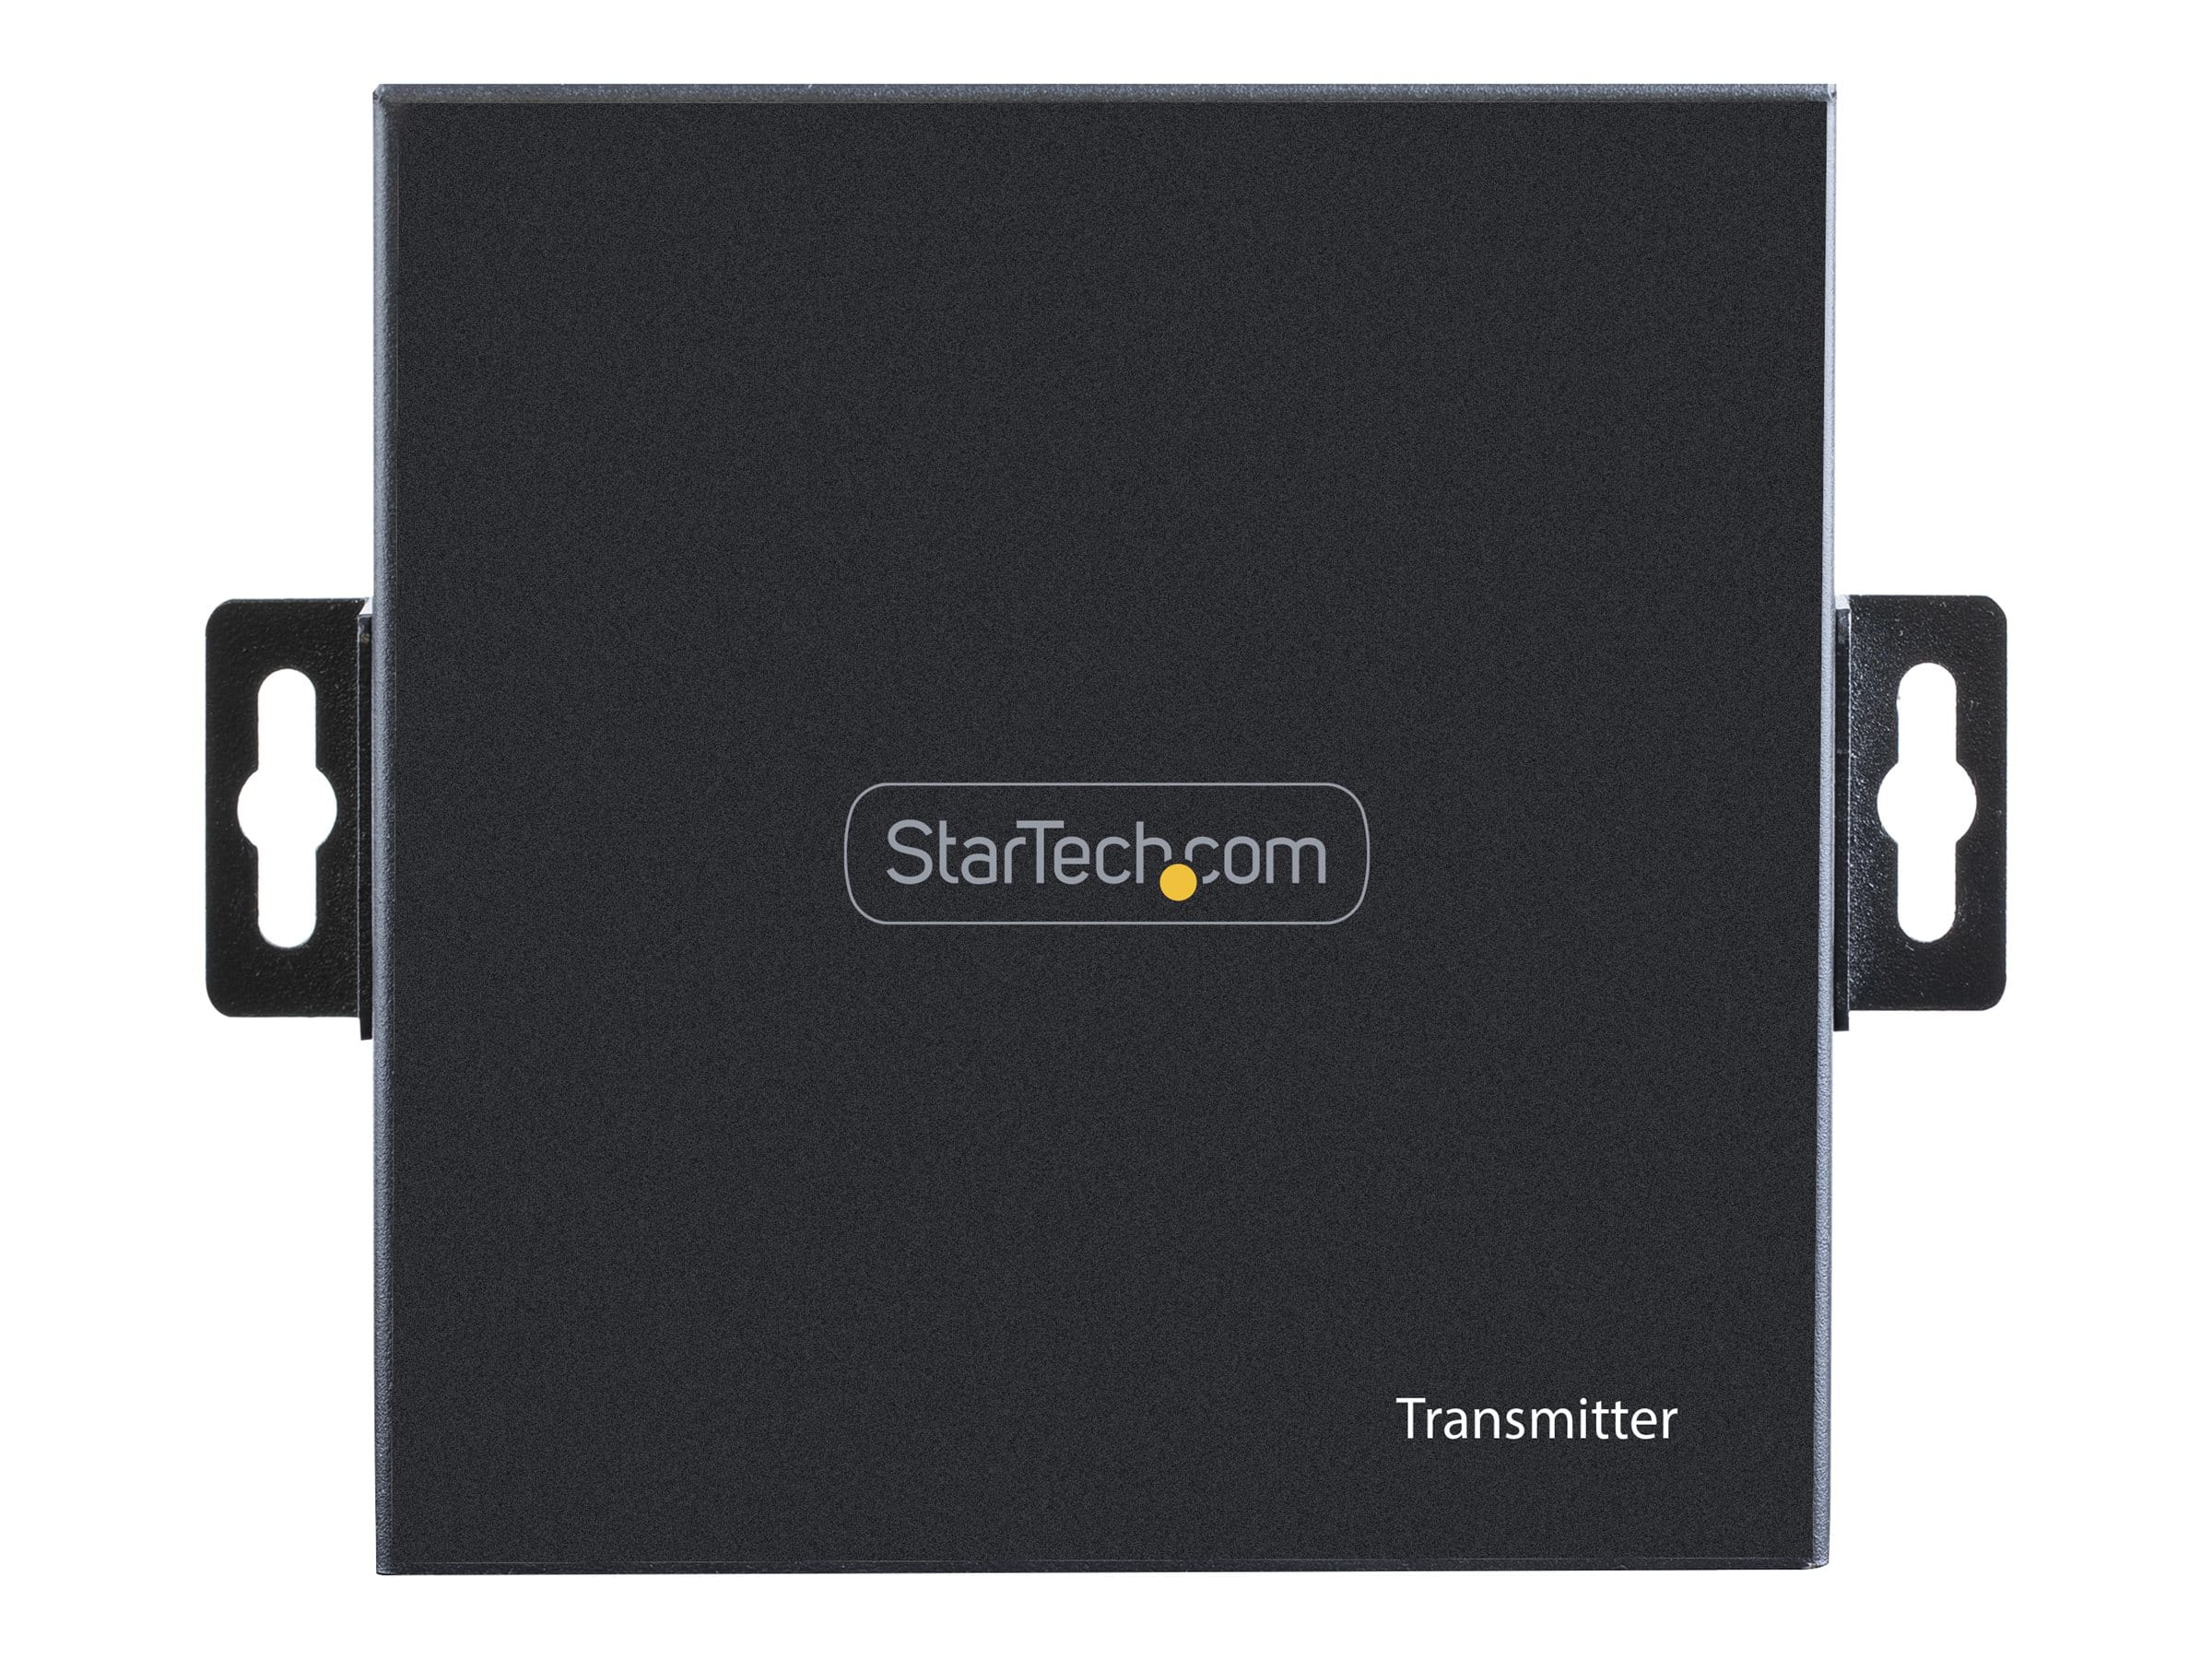 StarTech.com 4K HDMI Extender Over CAT5/CAT6 Cable, 4K 60Hz HDR Video Extender, Up to 230ft (70m)